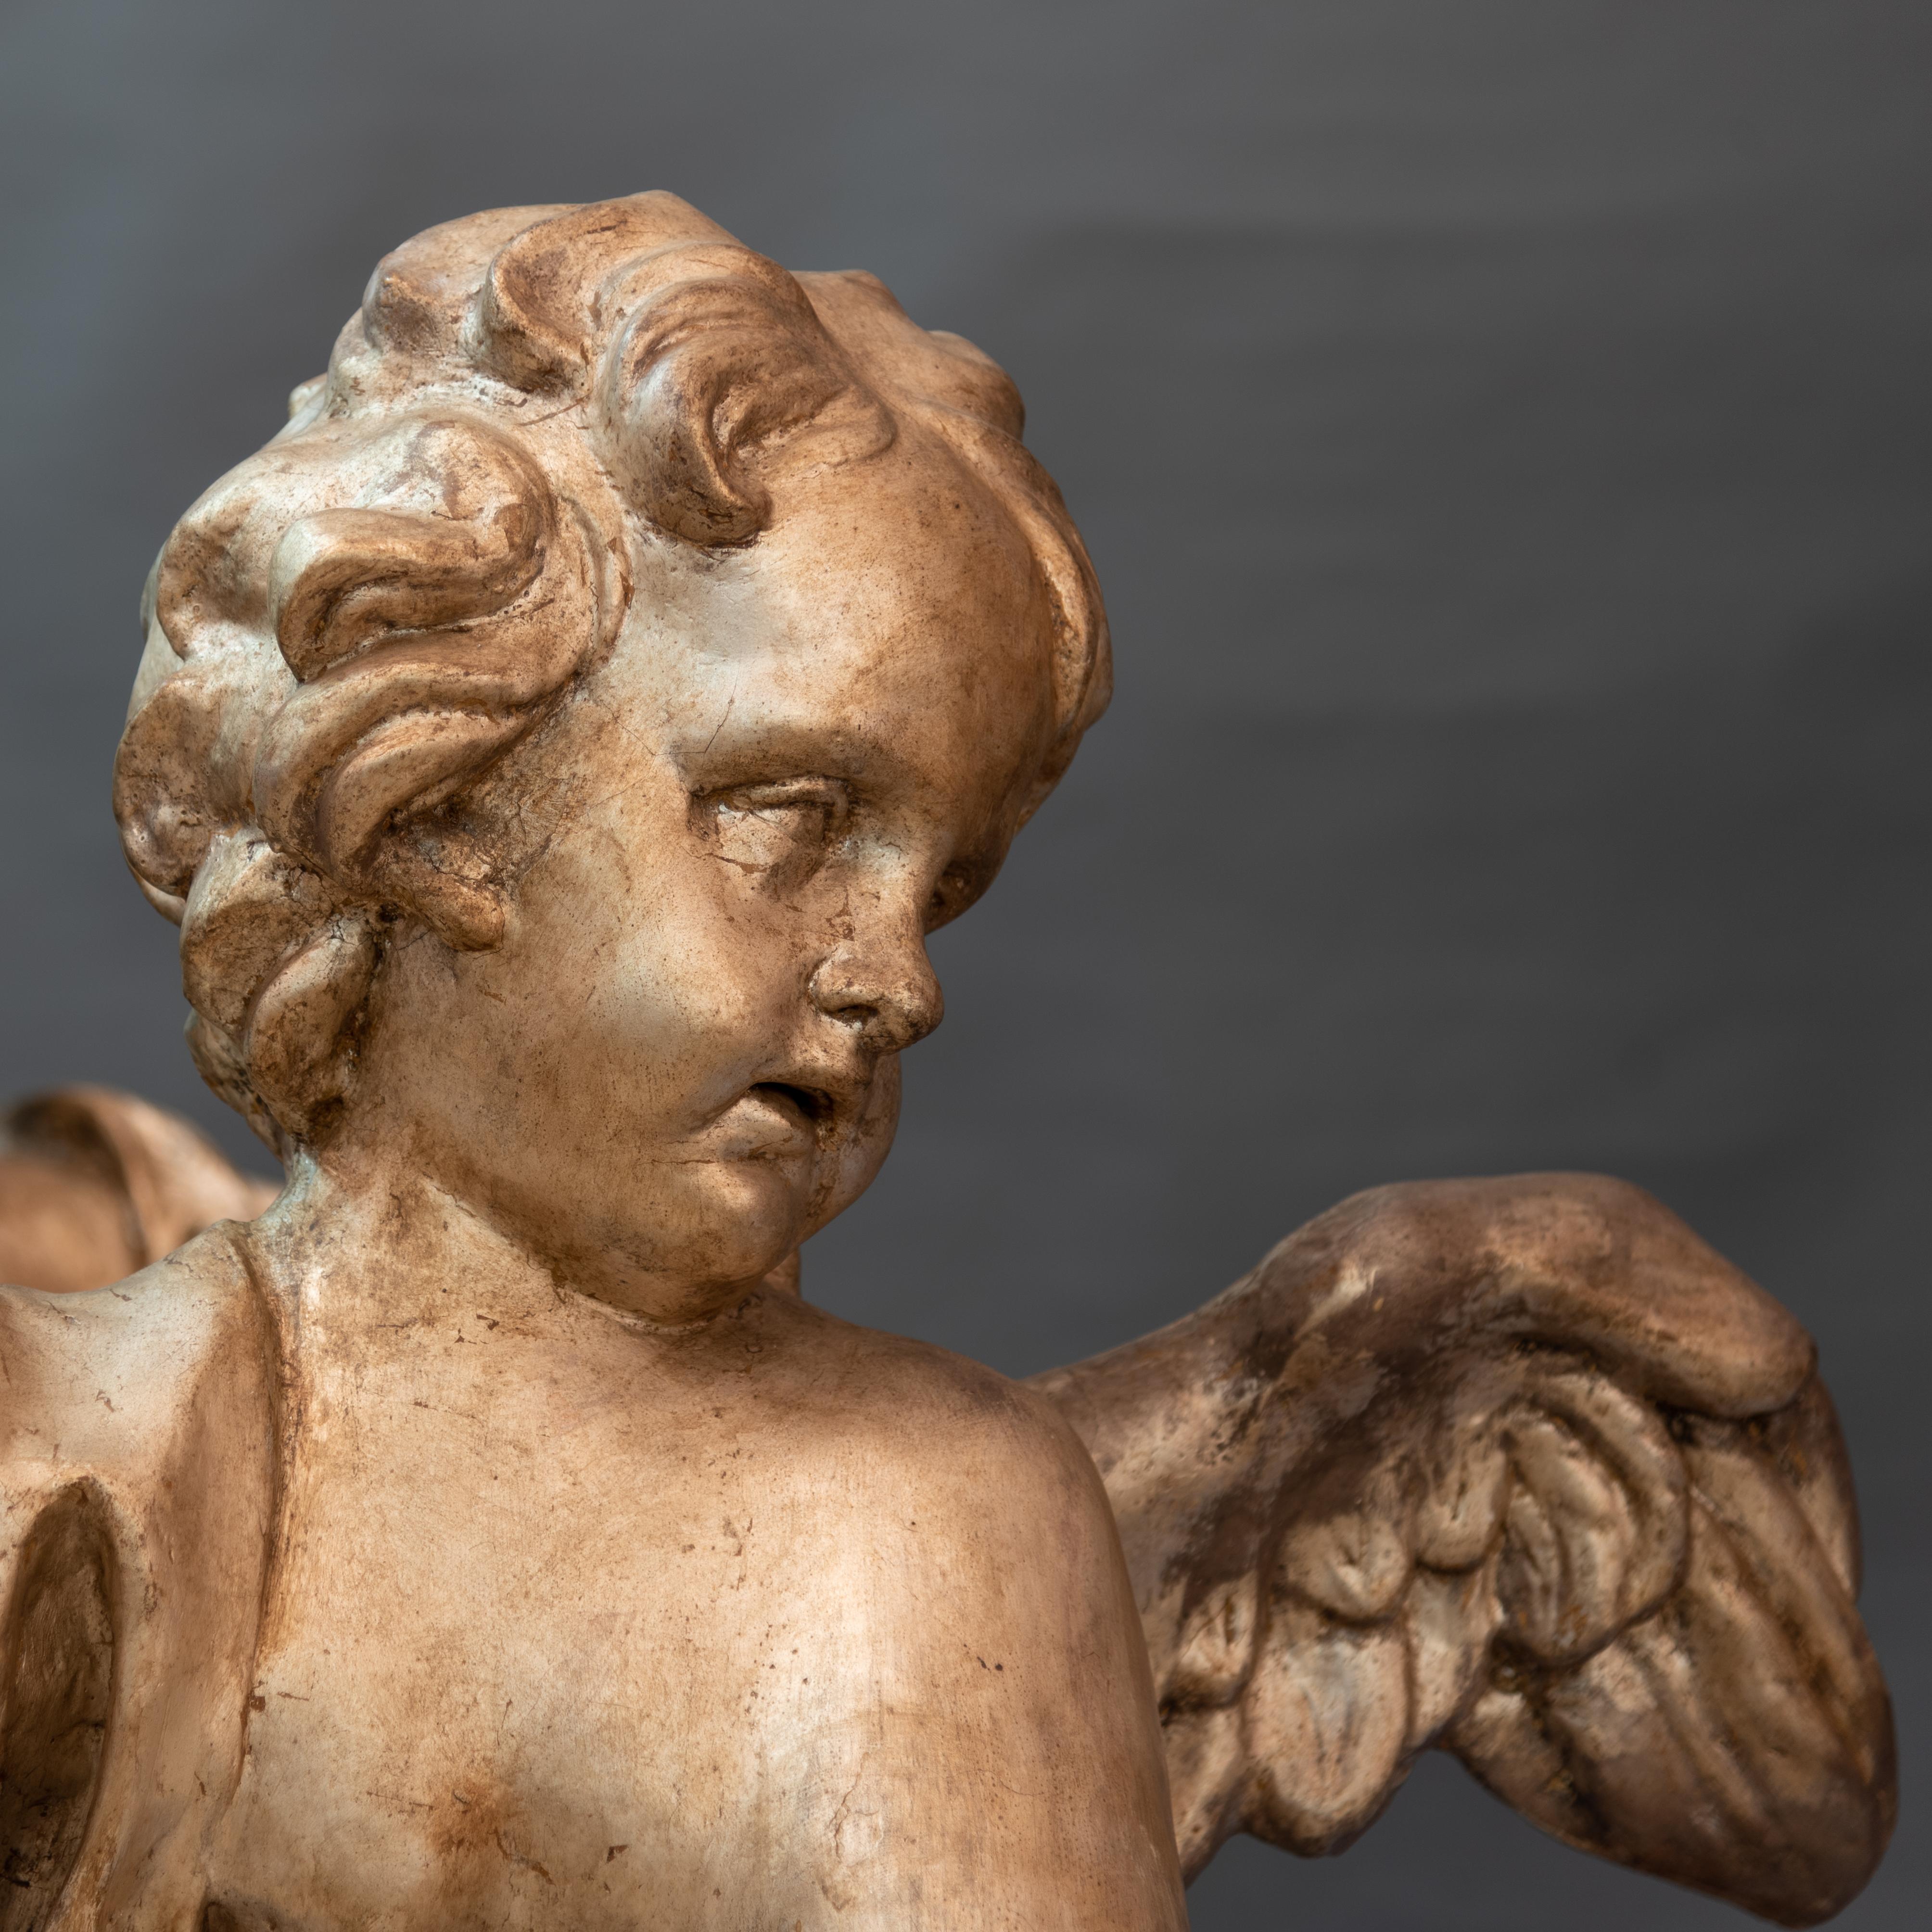 Pair of large angels, mecca silver papier mâché
Florence, late Baroque period
Original bases in faux marble lacquered wood.

These pair of large angels are shipped from Rome,Italy. Under existing legislation, any artwork in Italy created over 70